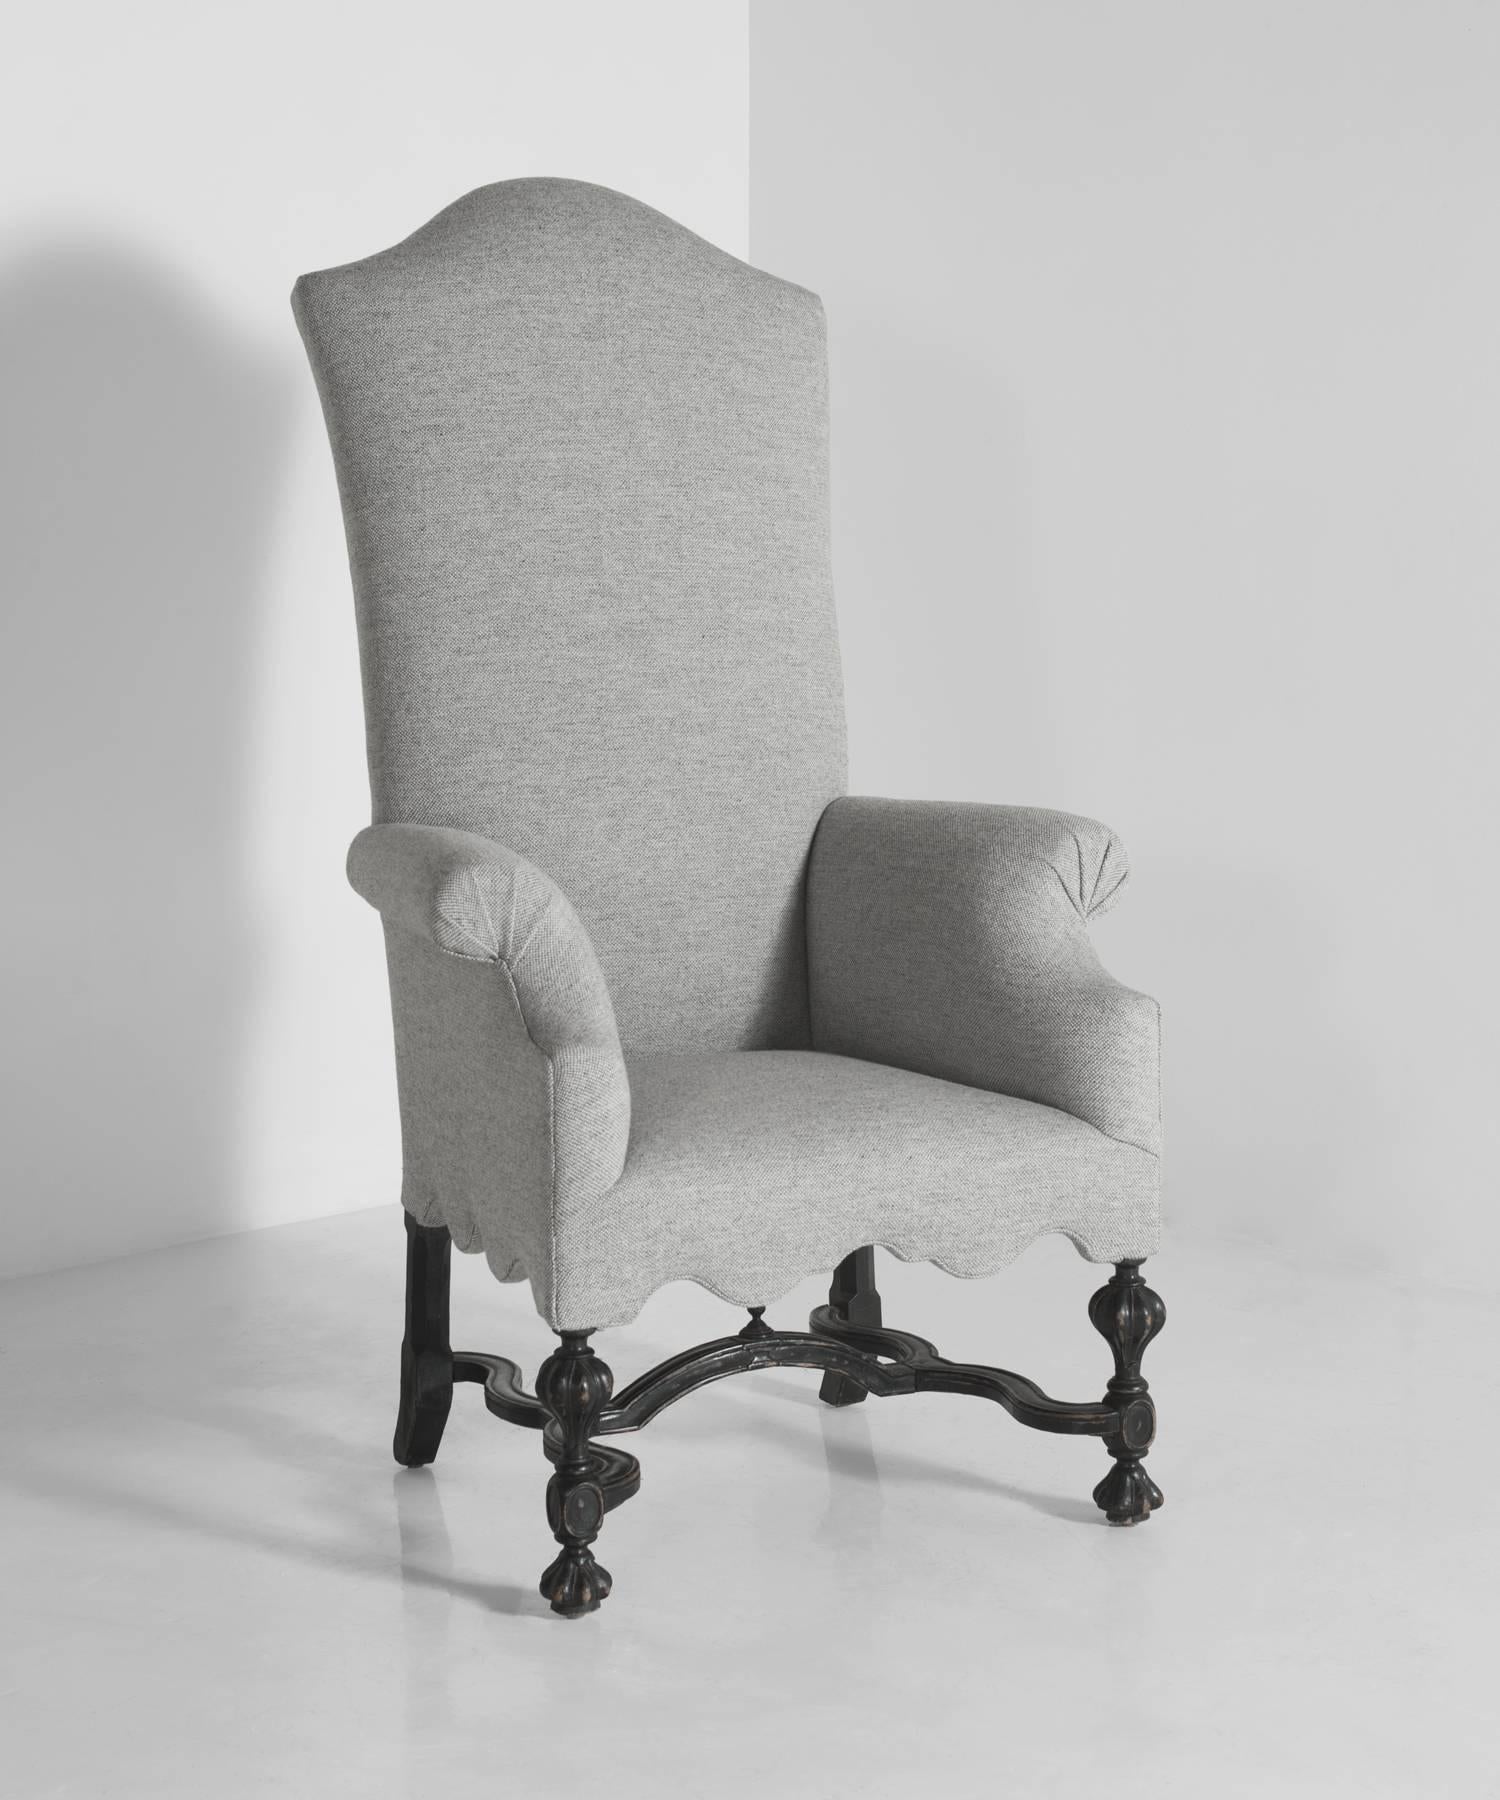 William & Mary Tall Armchair, England, circa 1800.

Newly reupholstered in Wool Maharam Fabric, on elegant carved wooden base.